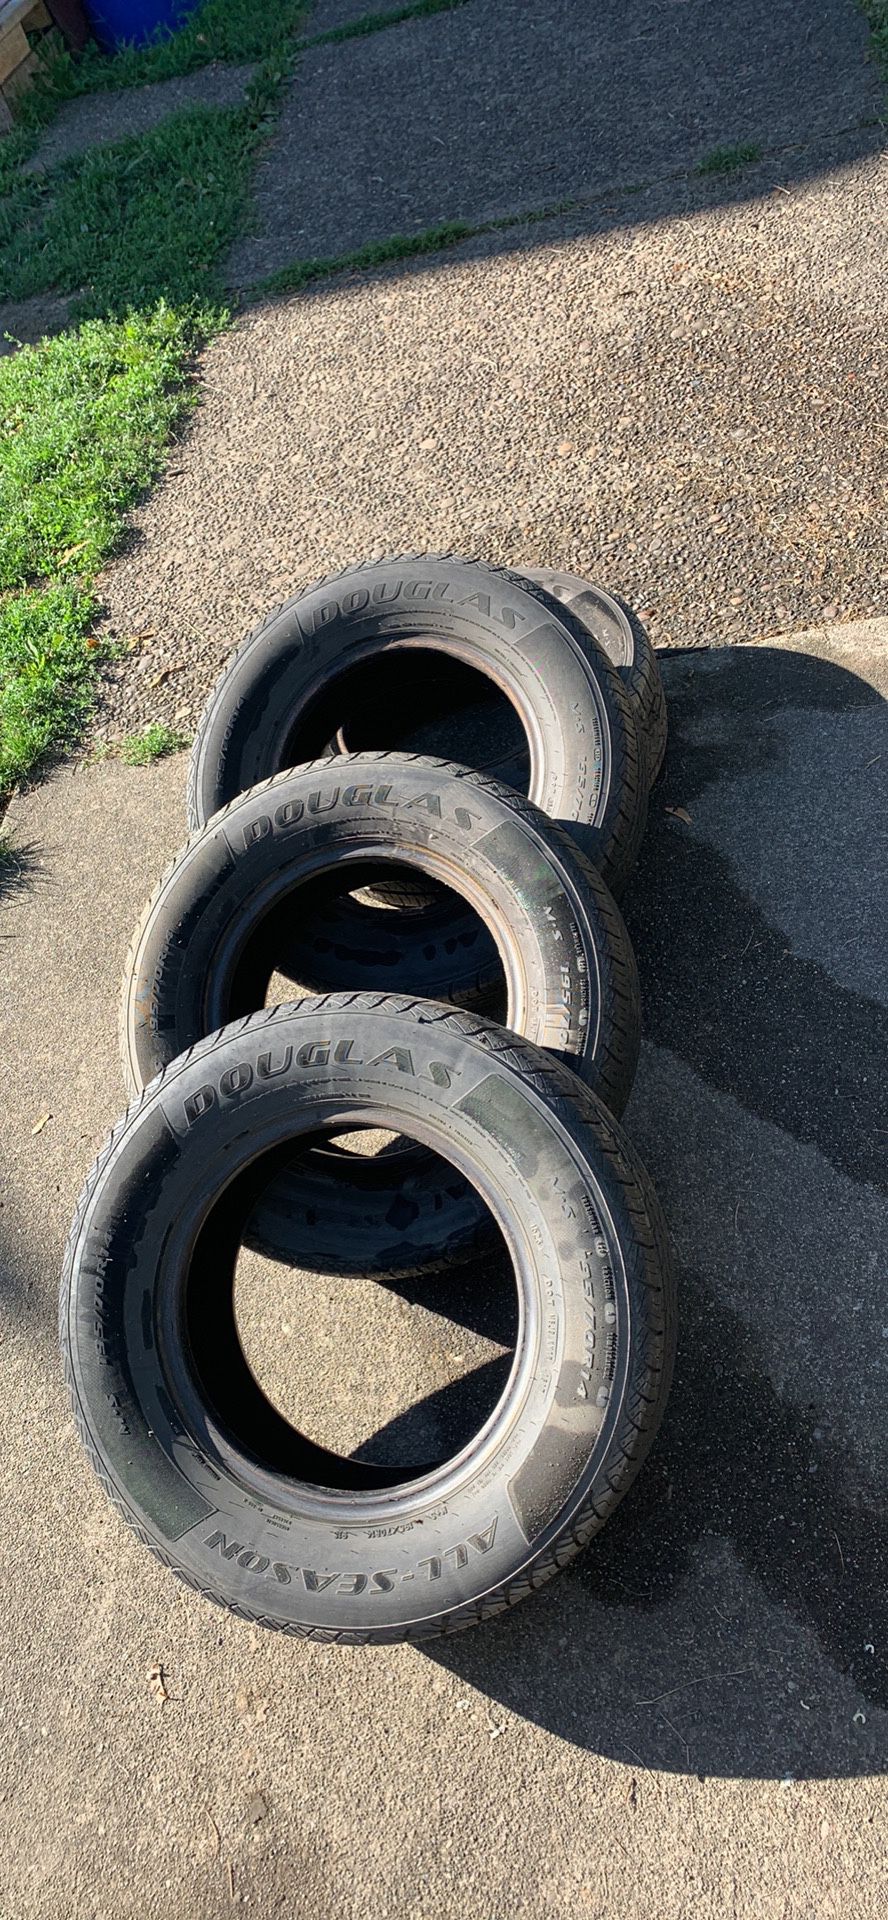 Selling a set of Douglas all season tires size 195/70/r14 asking $180 for pick up $200 for delivery fee there retailed in the store for $57.00a peace 